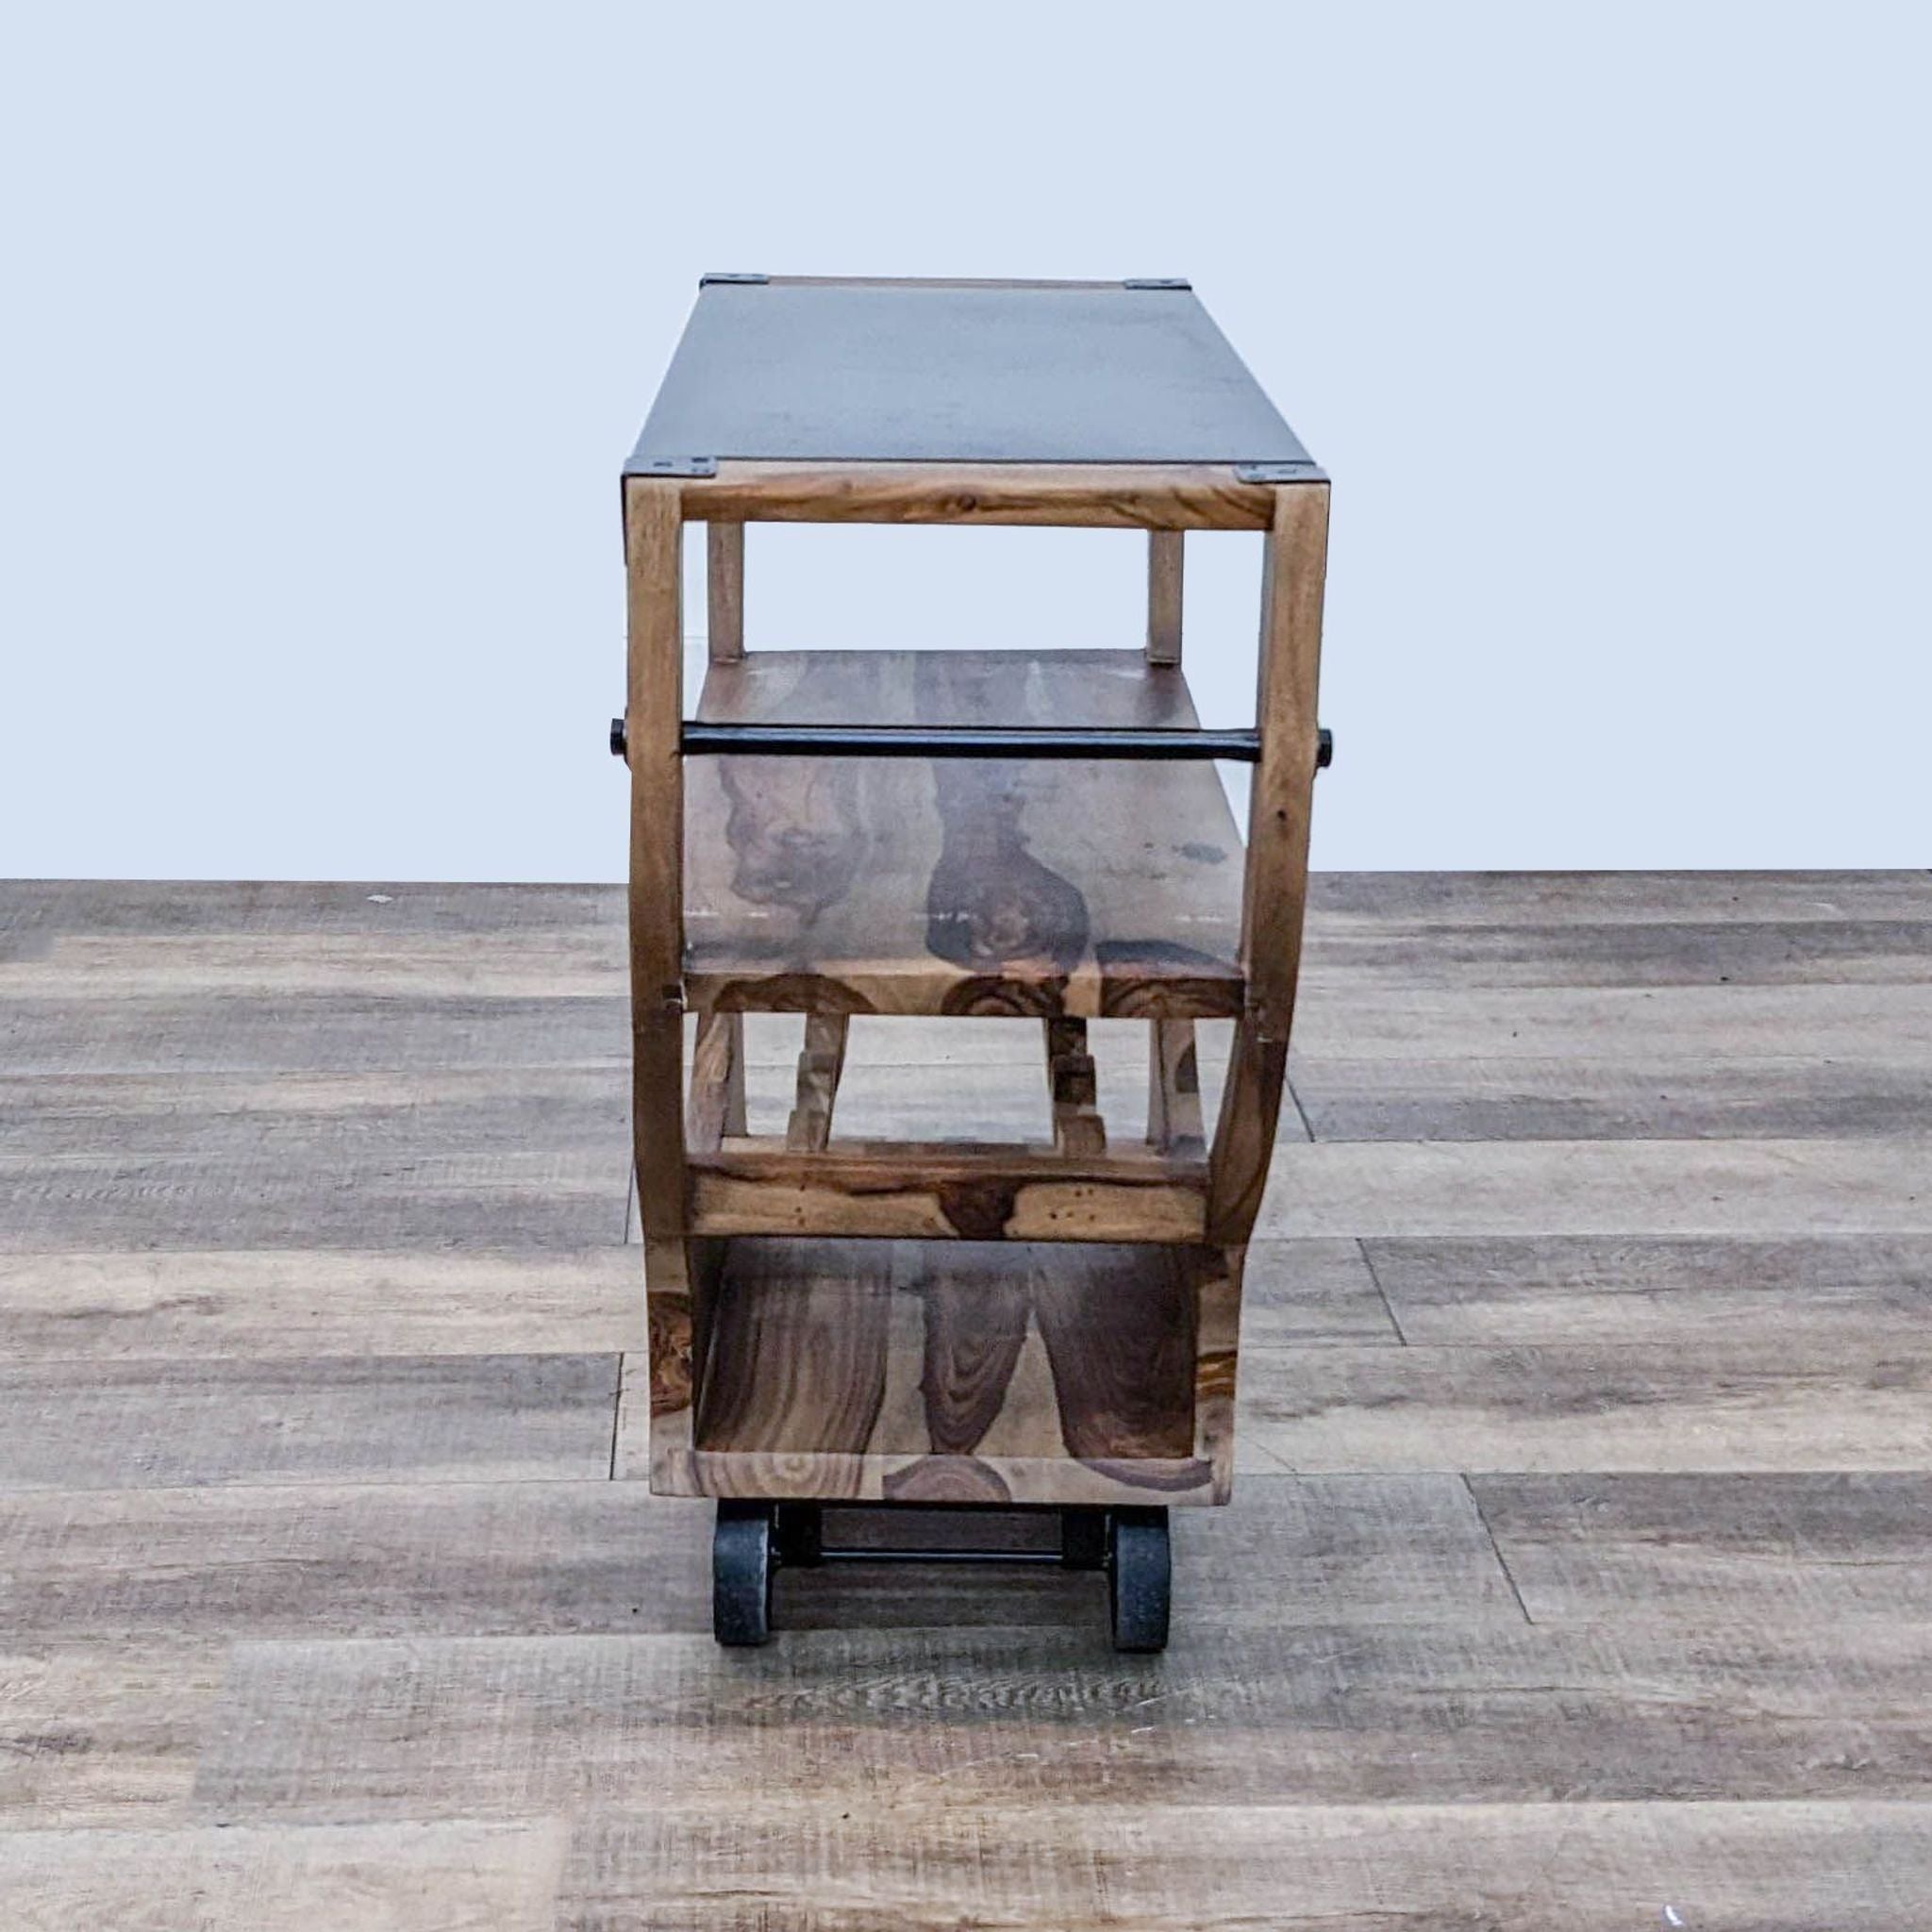 Reperch brand wood cart with metal top, two shelves, and a four-bottle wine rack on casters.